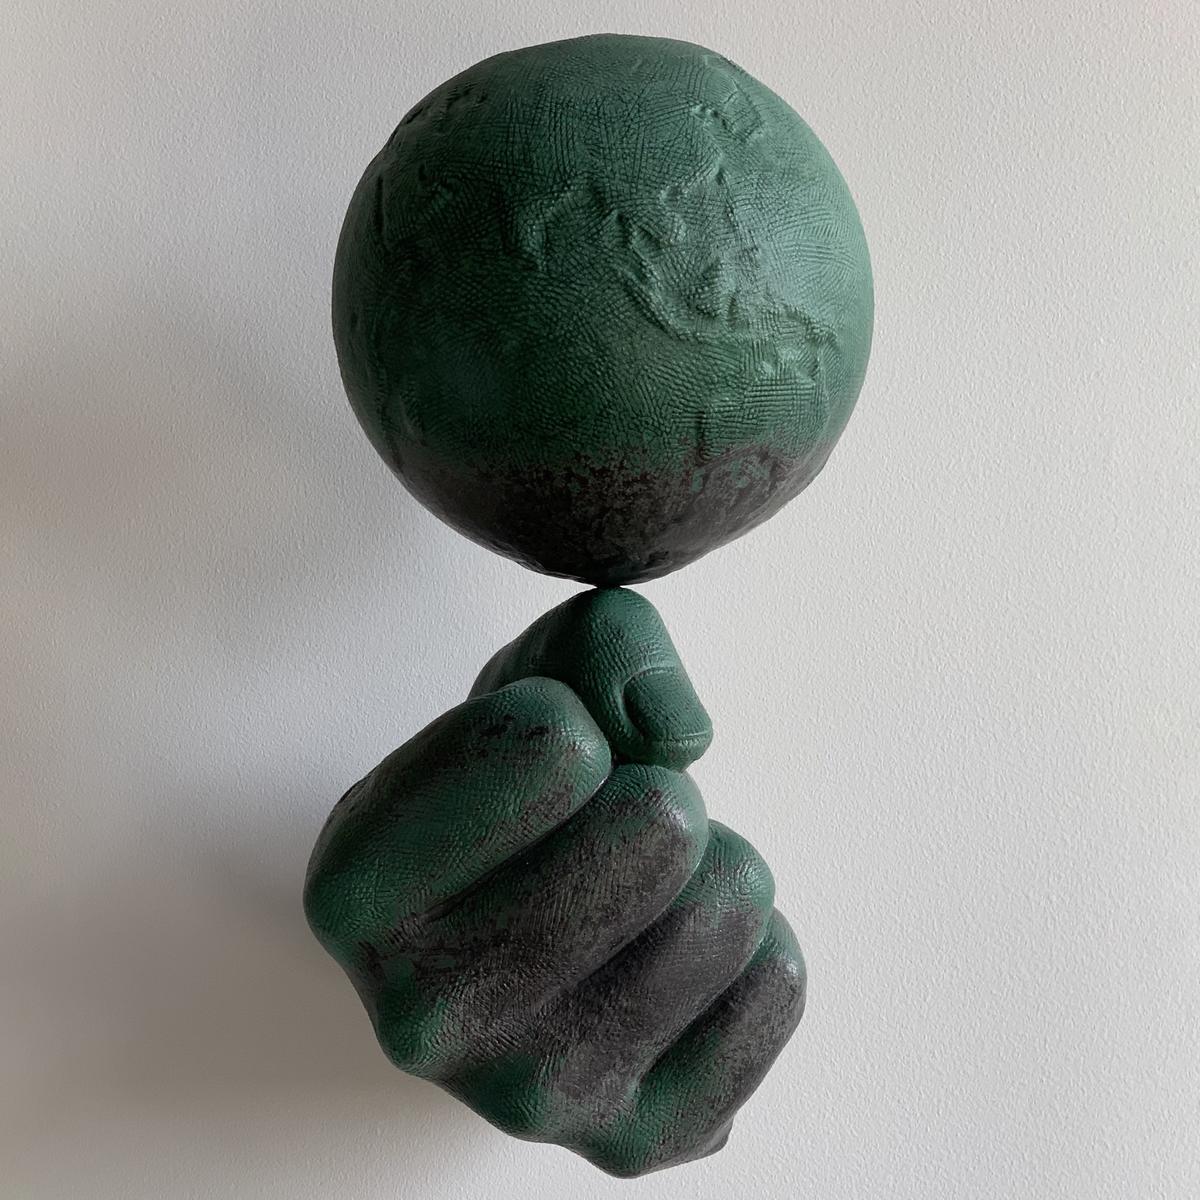 Ceramic wall sculpture of a fist balancing the earth.